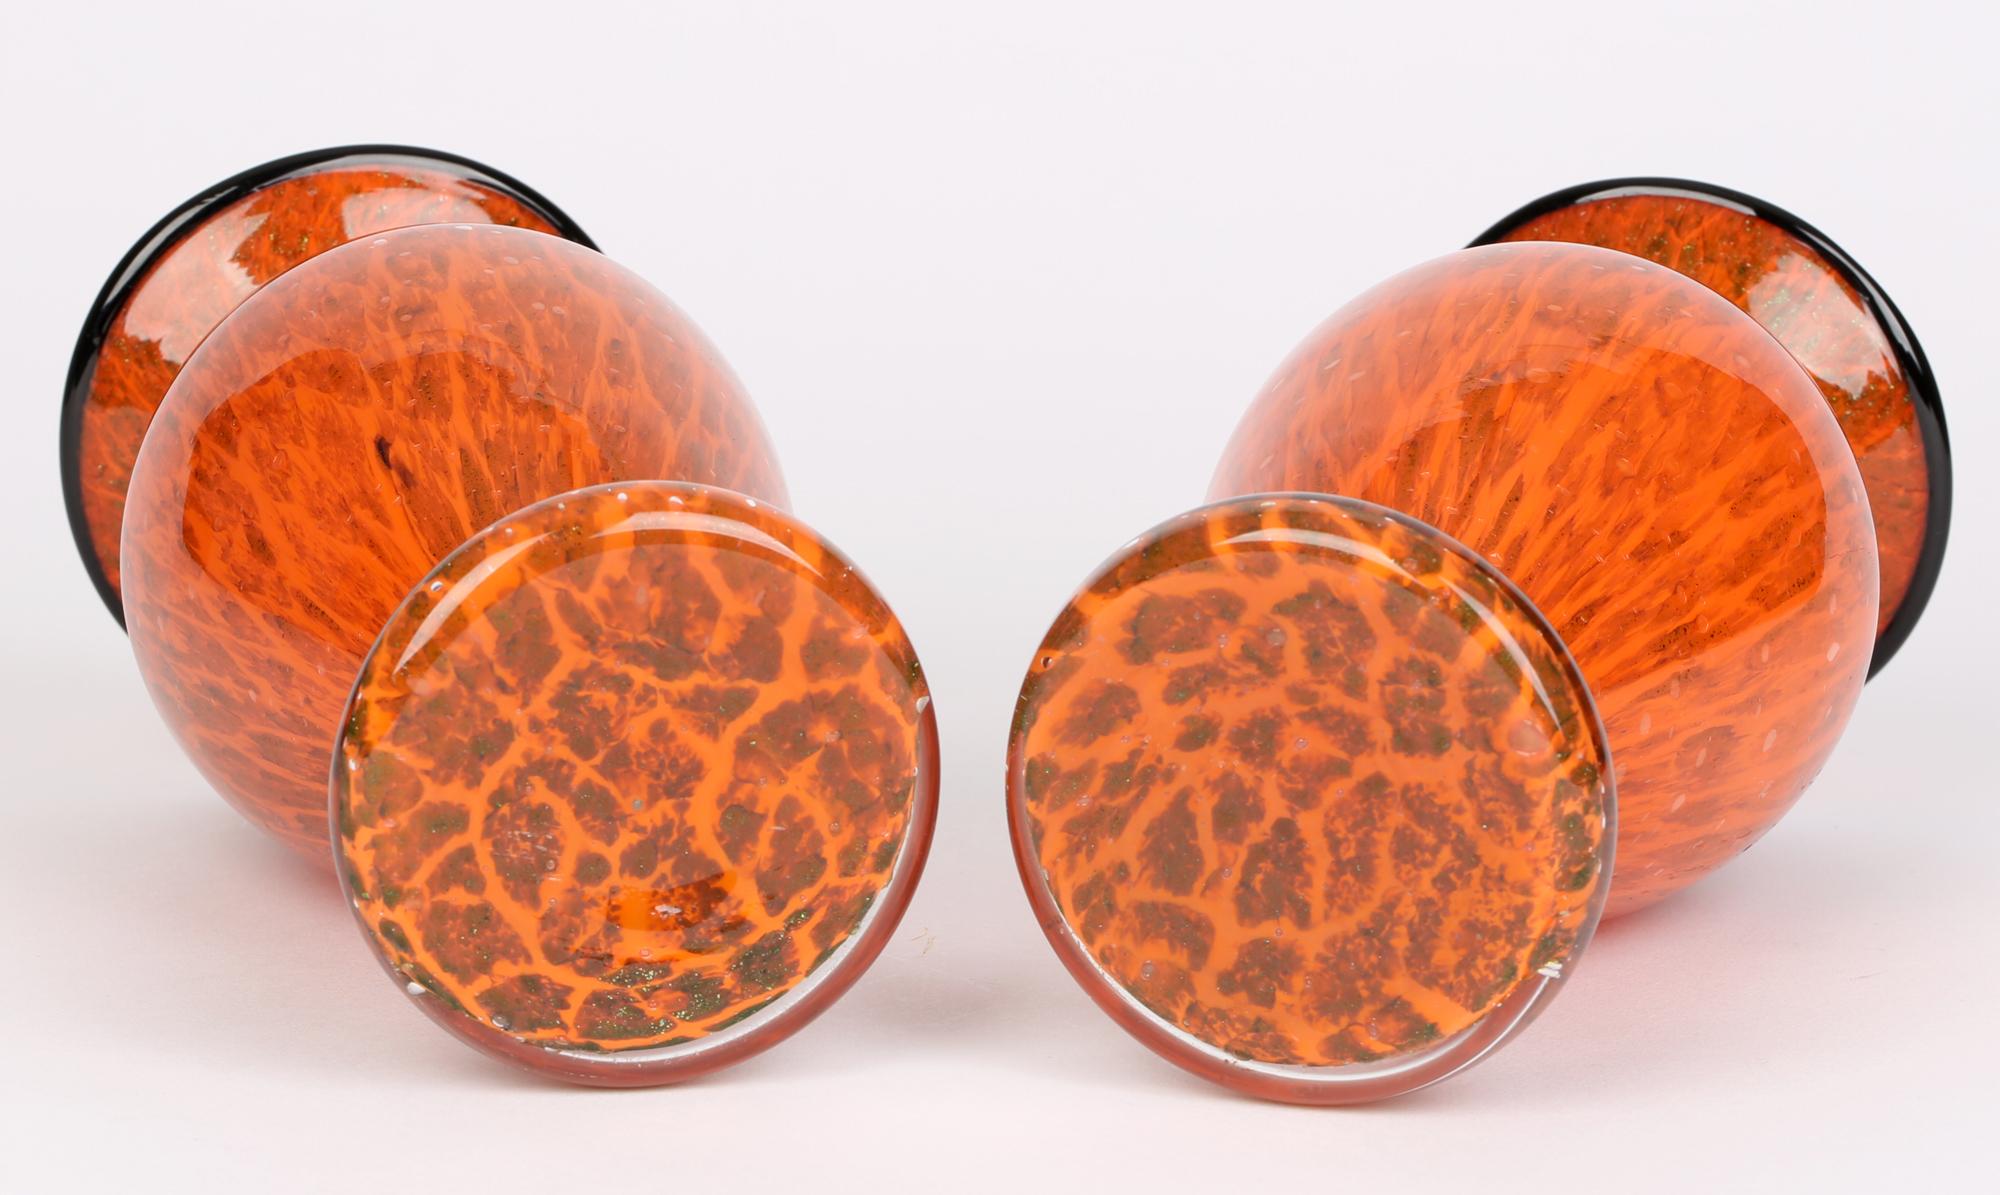 Fine pair Bohemian art glass tango vases with gold aventurine inclusions attributed to Loetz and dating from the 1920’s. These stylish vases are blown in clear glass with a cased orange glass body with patchwork aventurine inclusions and with a